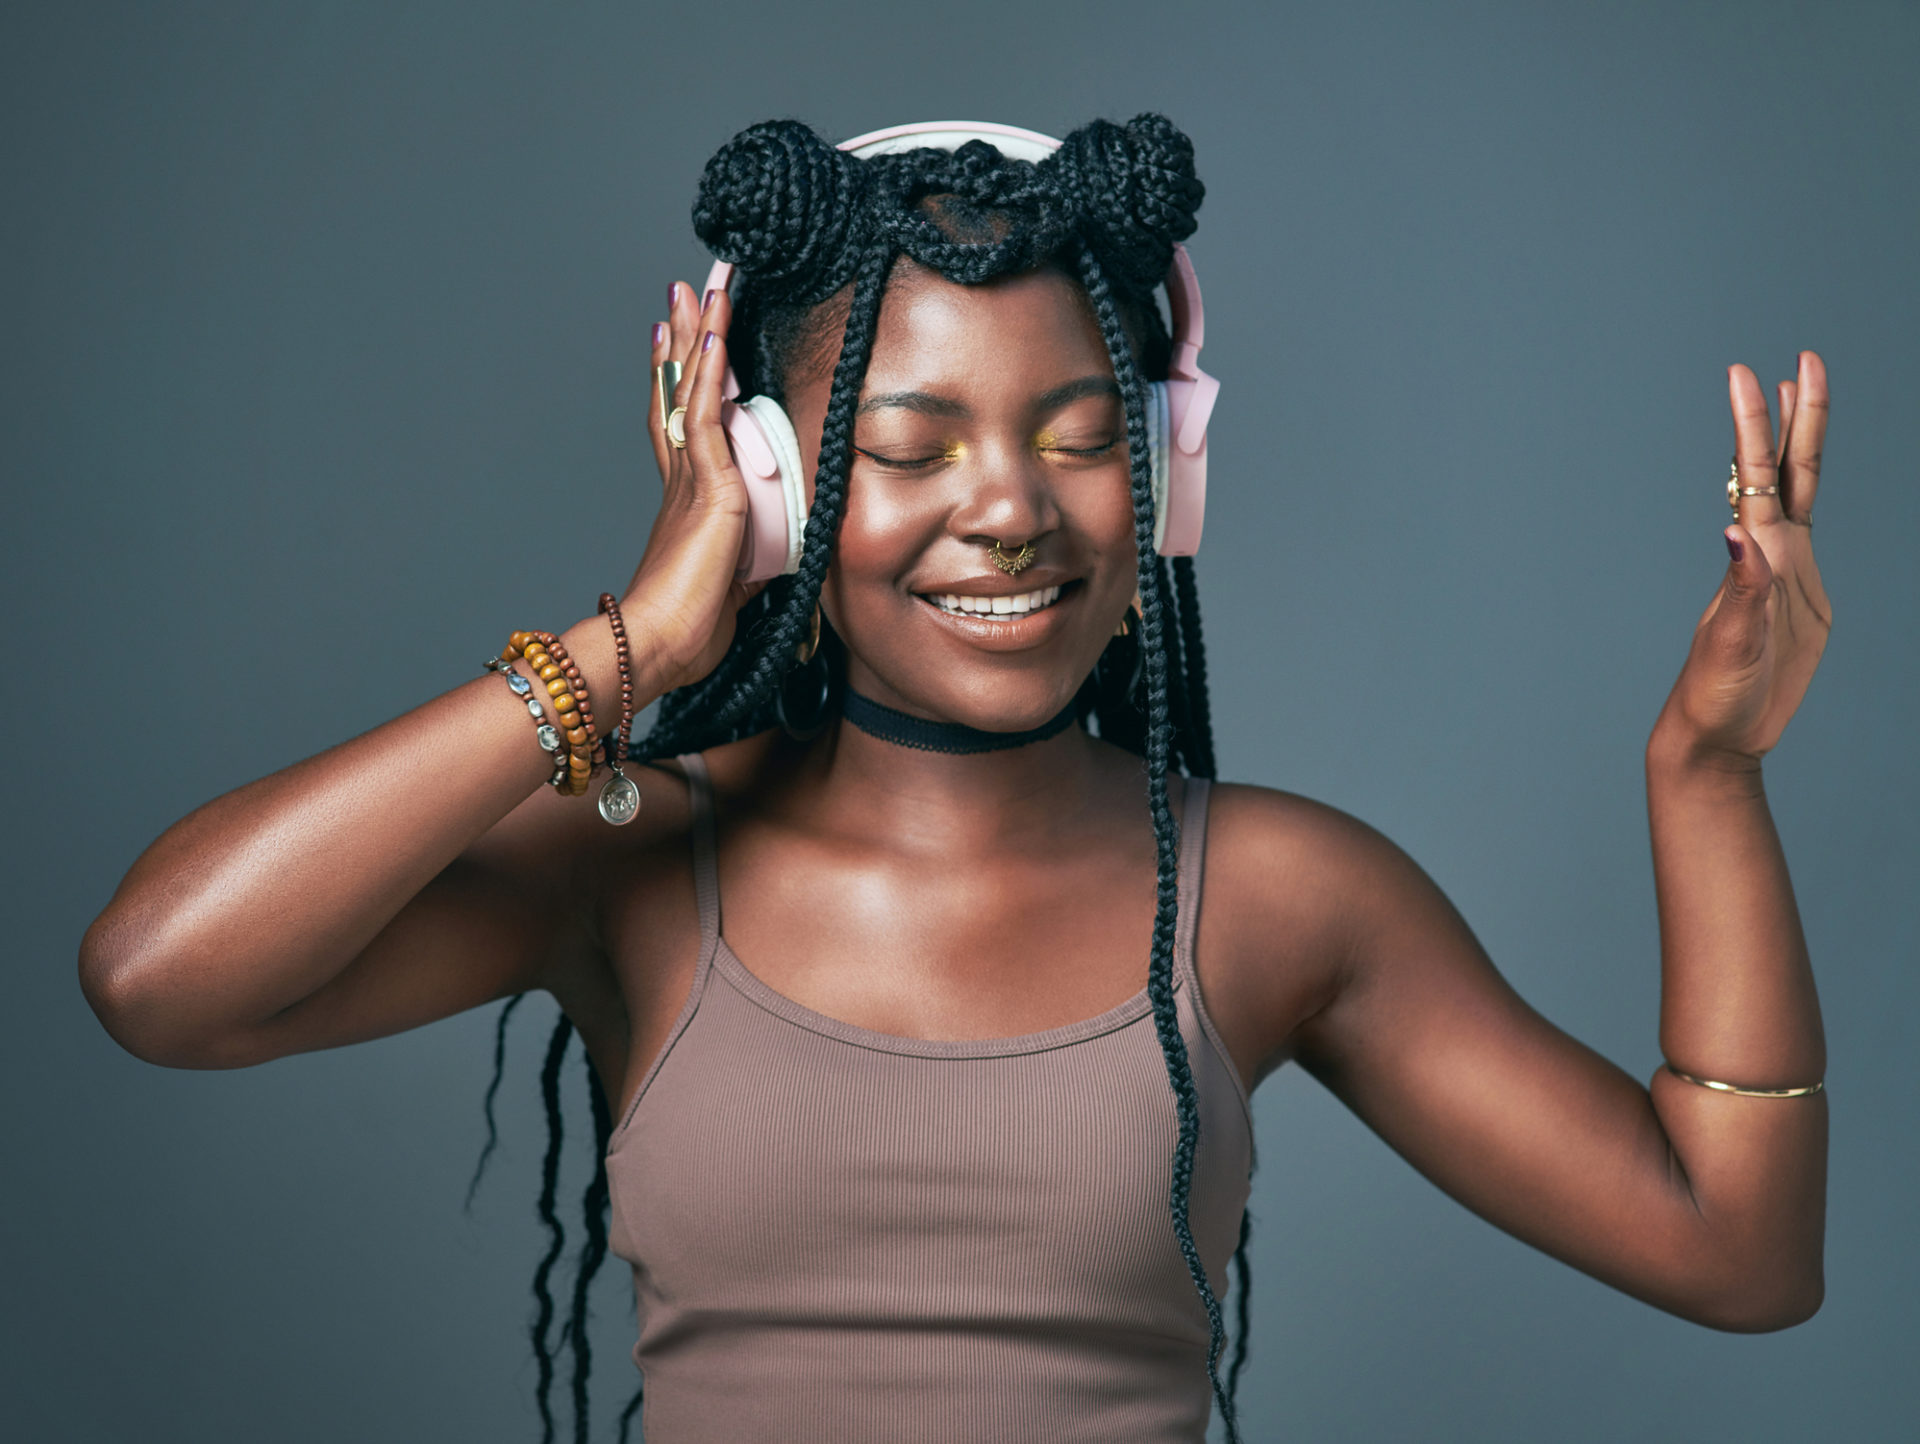 Studio shot of a trendy young woman using headphones against a grey background